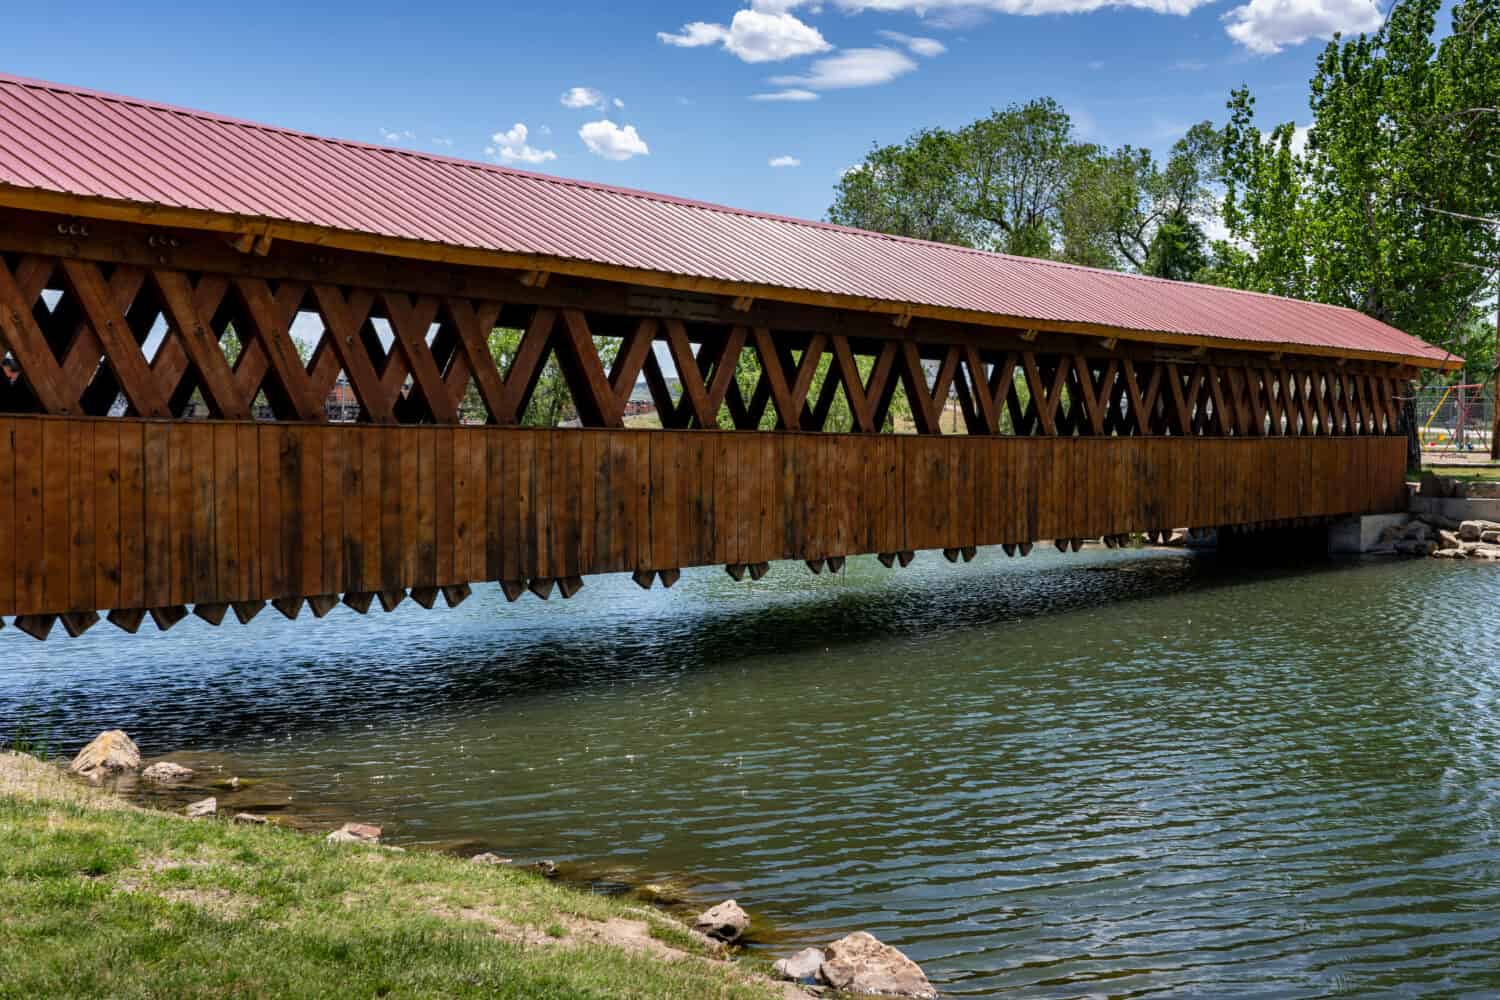 A covered bridge spans a pond in the park at Edgemont, South Dakota.